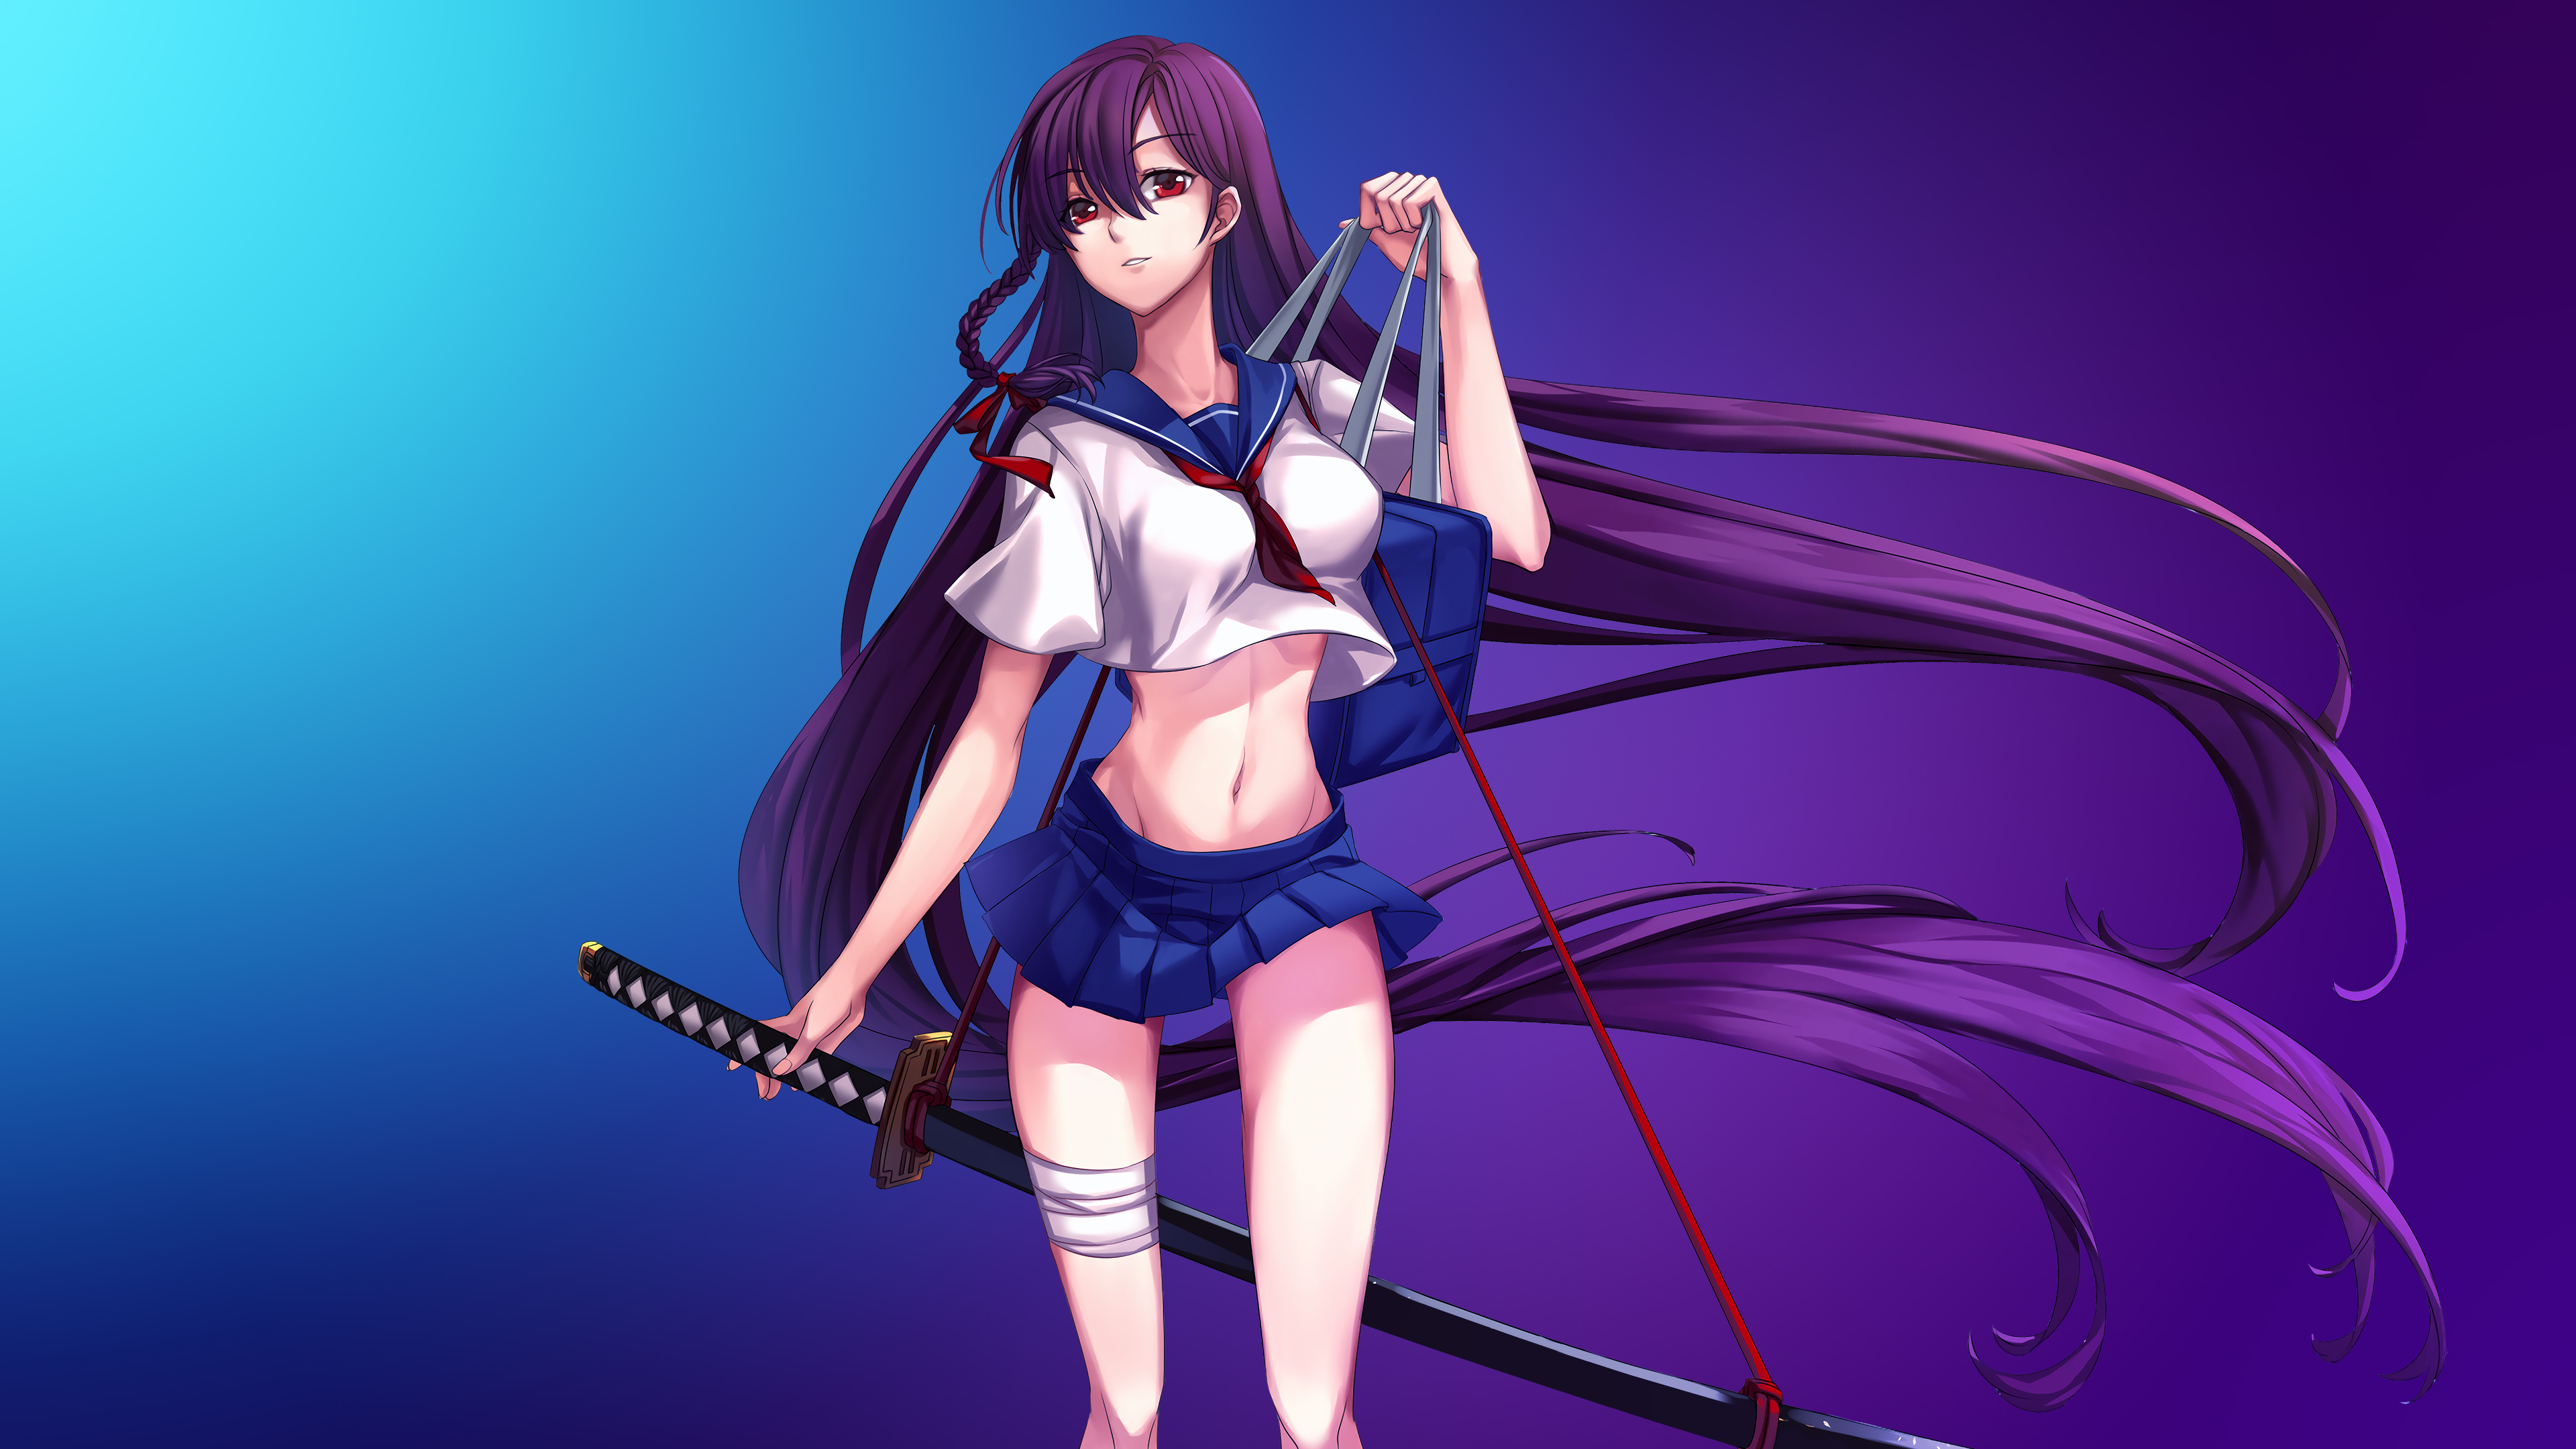 Katana girl k hd anime k wallpapers images backgrounds photos and pictures